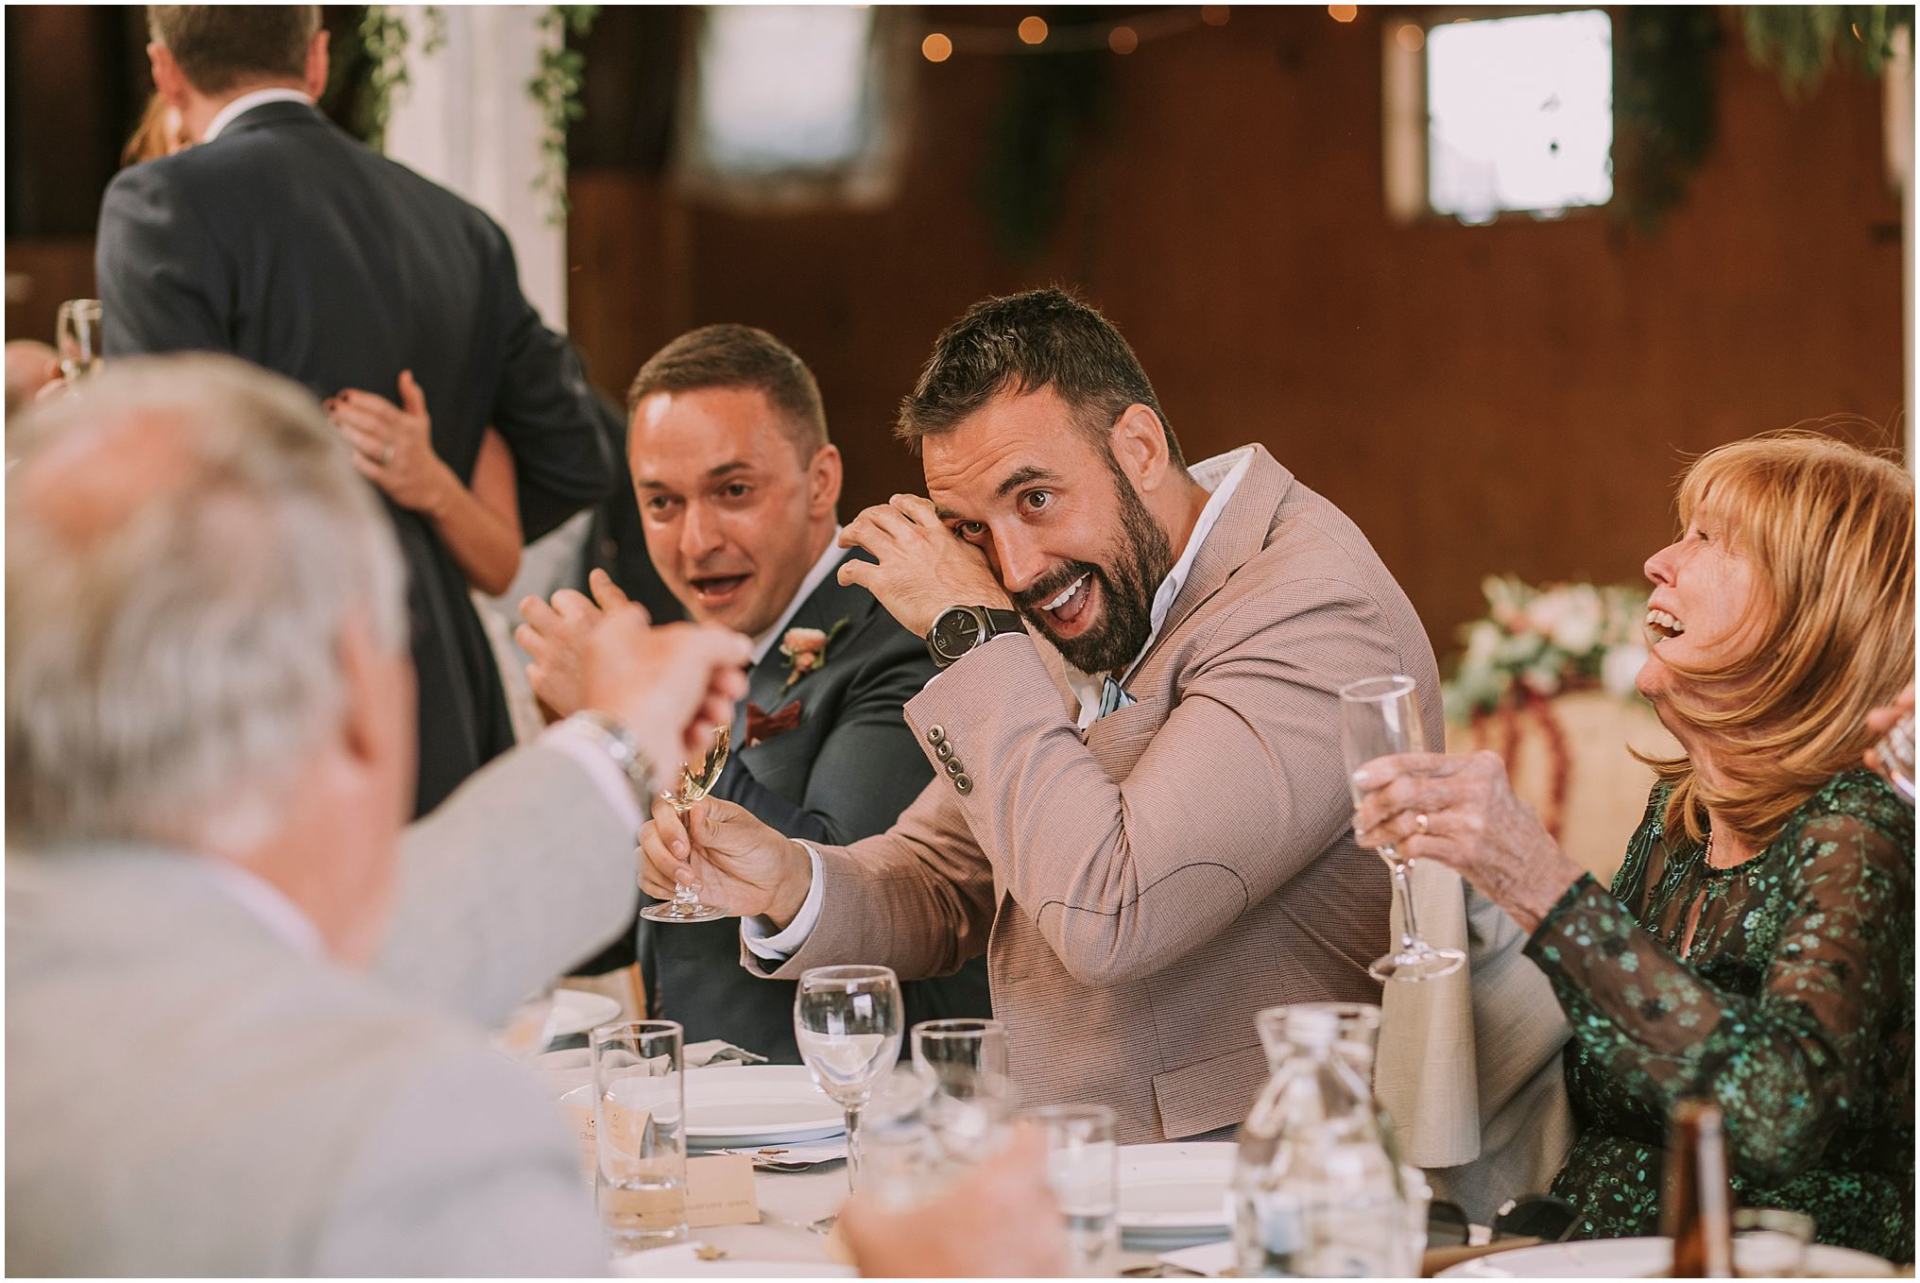 Charlotte Kiri Photography - Wedding Photography of a wedding reception, with guests crying with laughter as they chat over champagne, at a long table, in Queenstown, New Zealand.